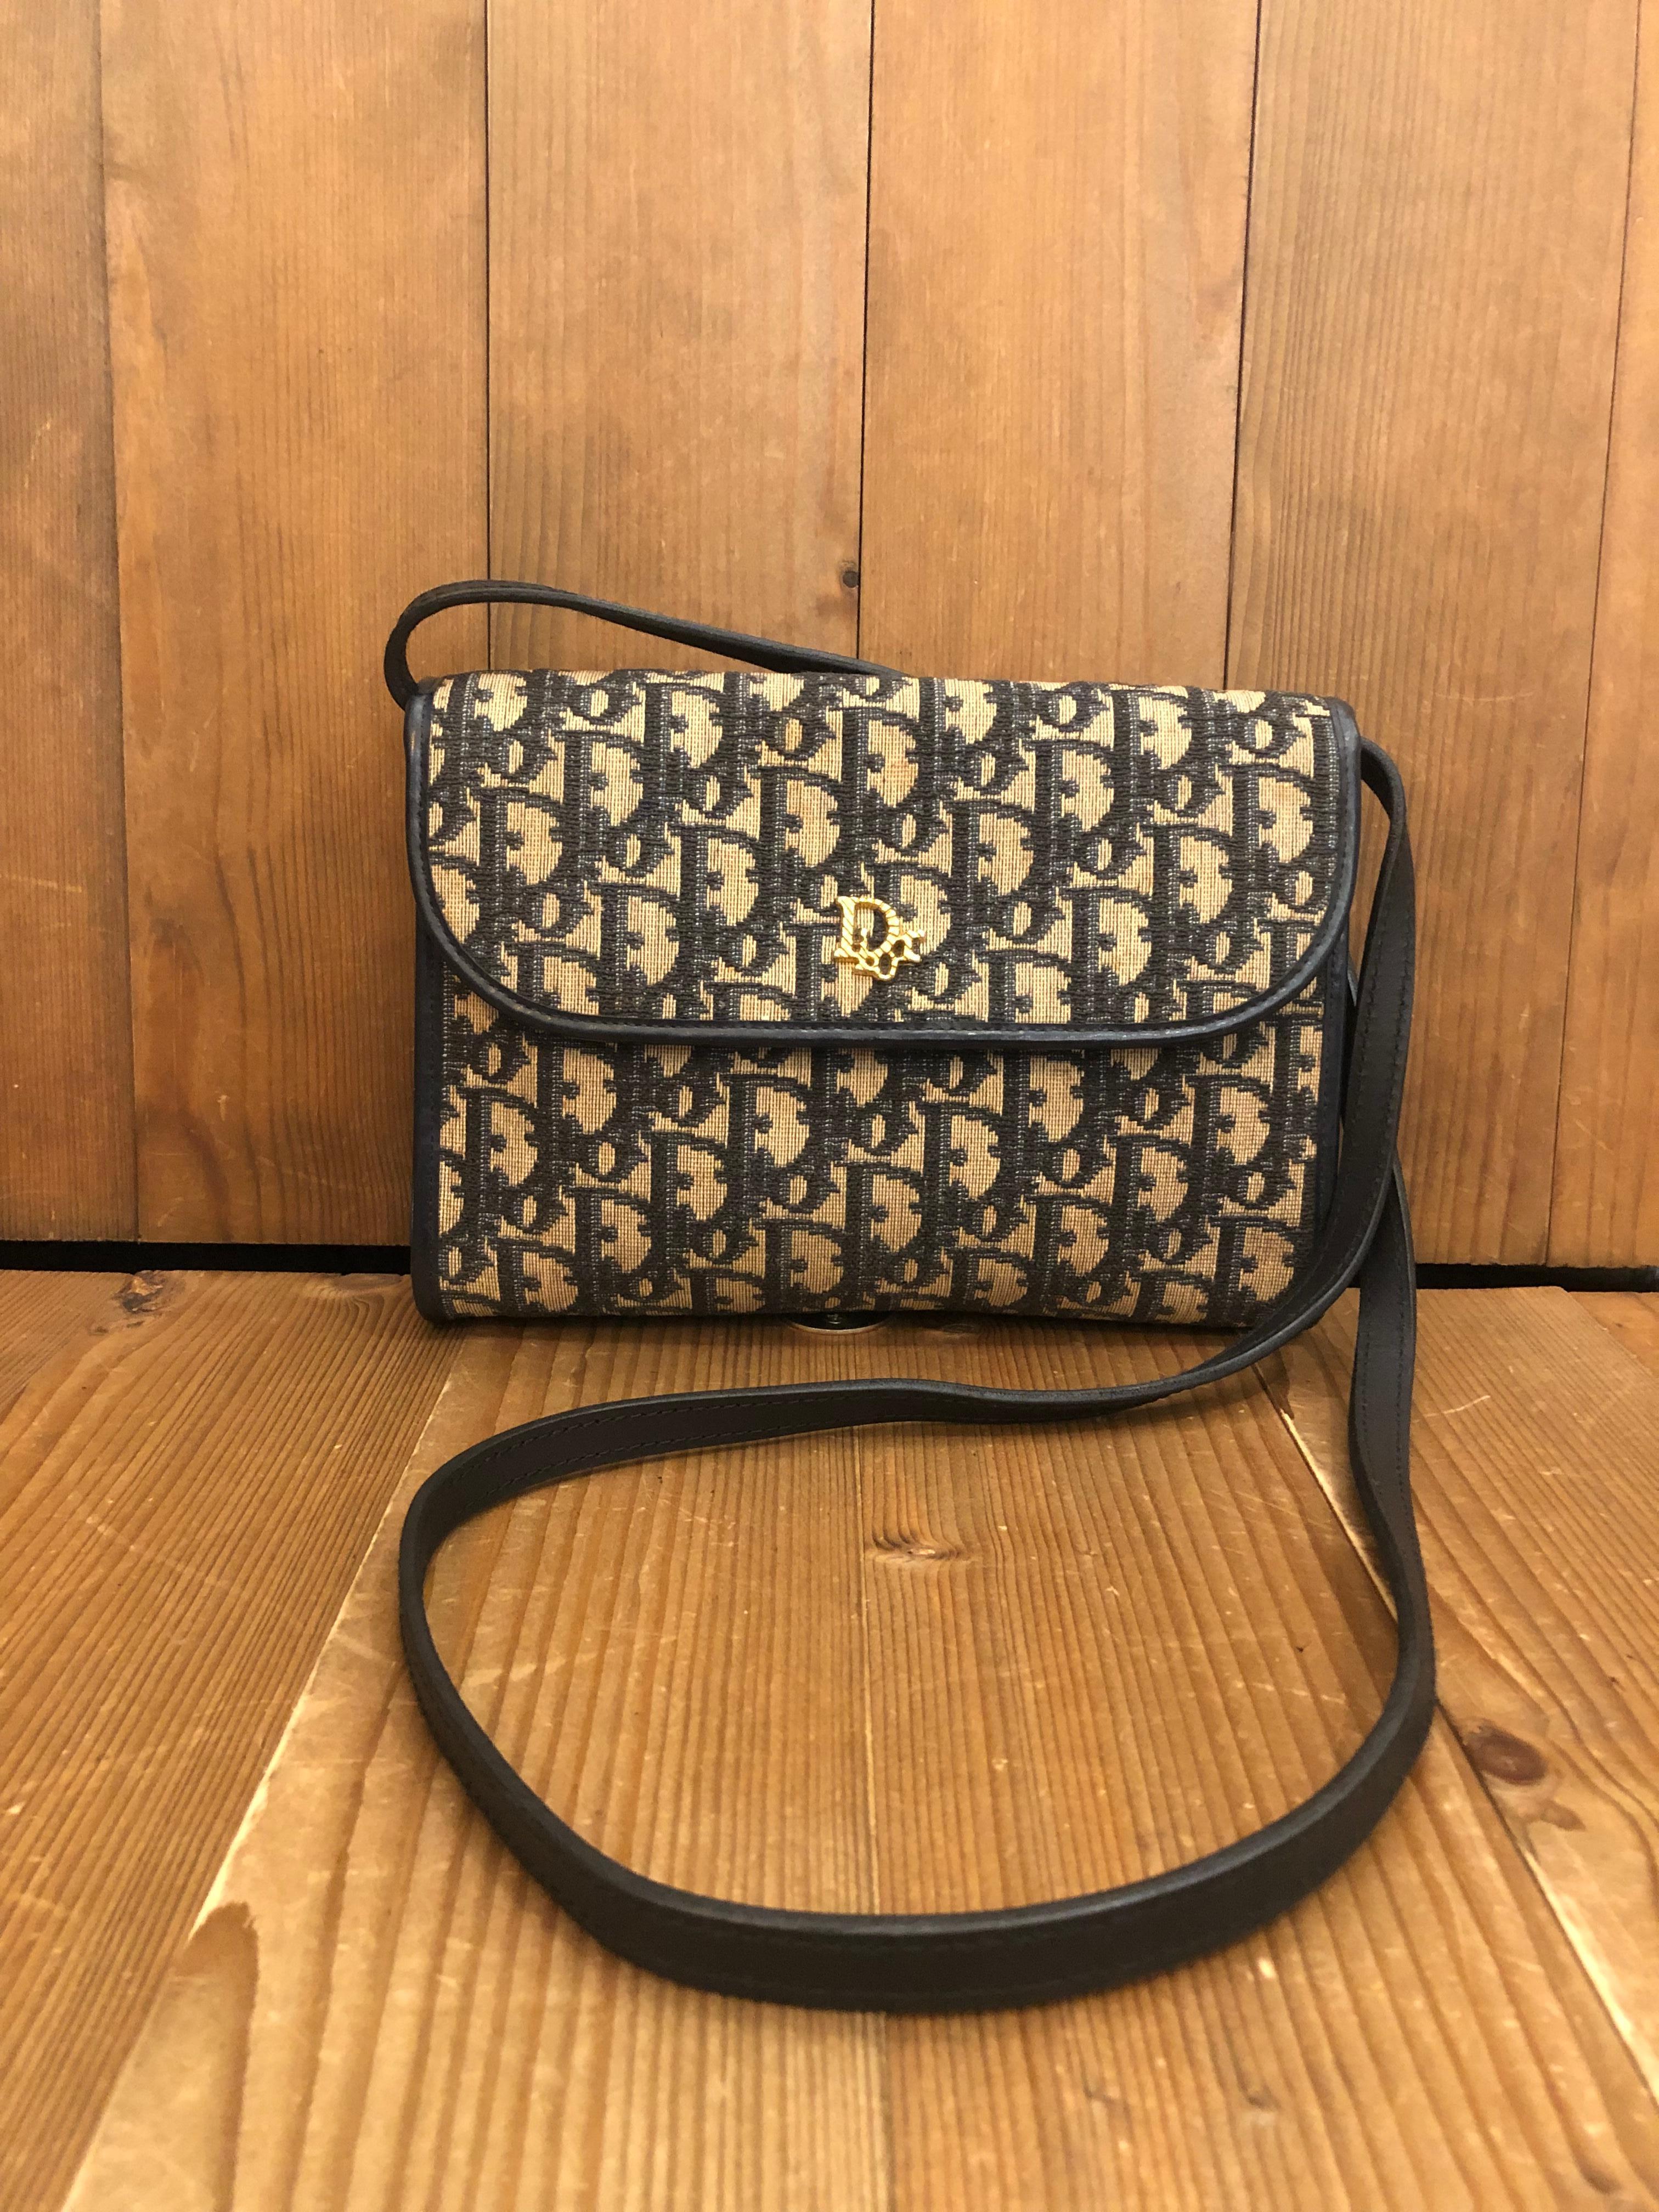 1970s Christian Dior 2-way crossbody clutch bag in navy trotter jacquard and leather featuring an interior zip pocket. It can be carried as a clutch or a crossbody bag by securing the detachable leather strap with snap fastenings. Made in France.